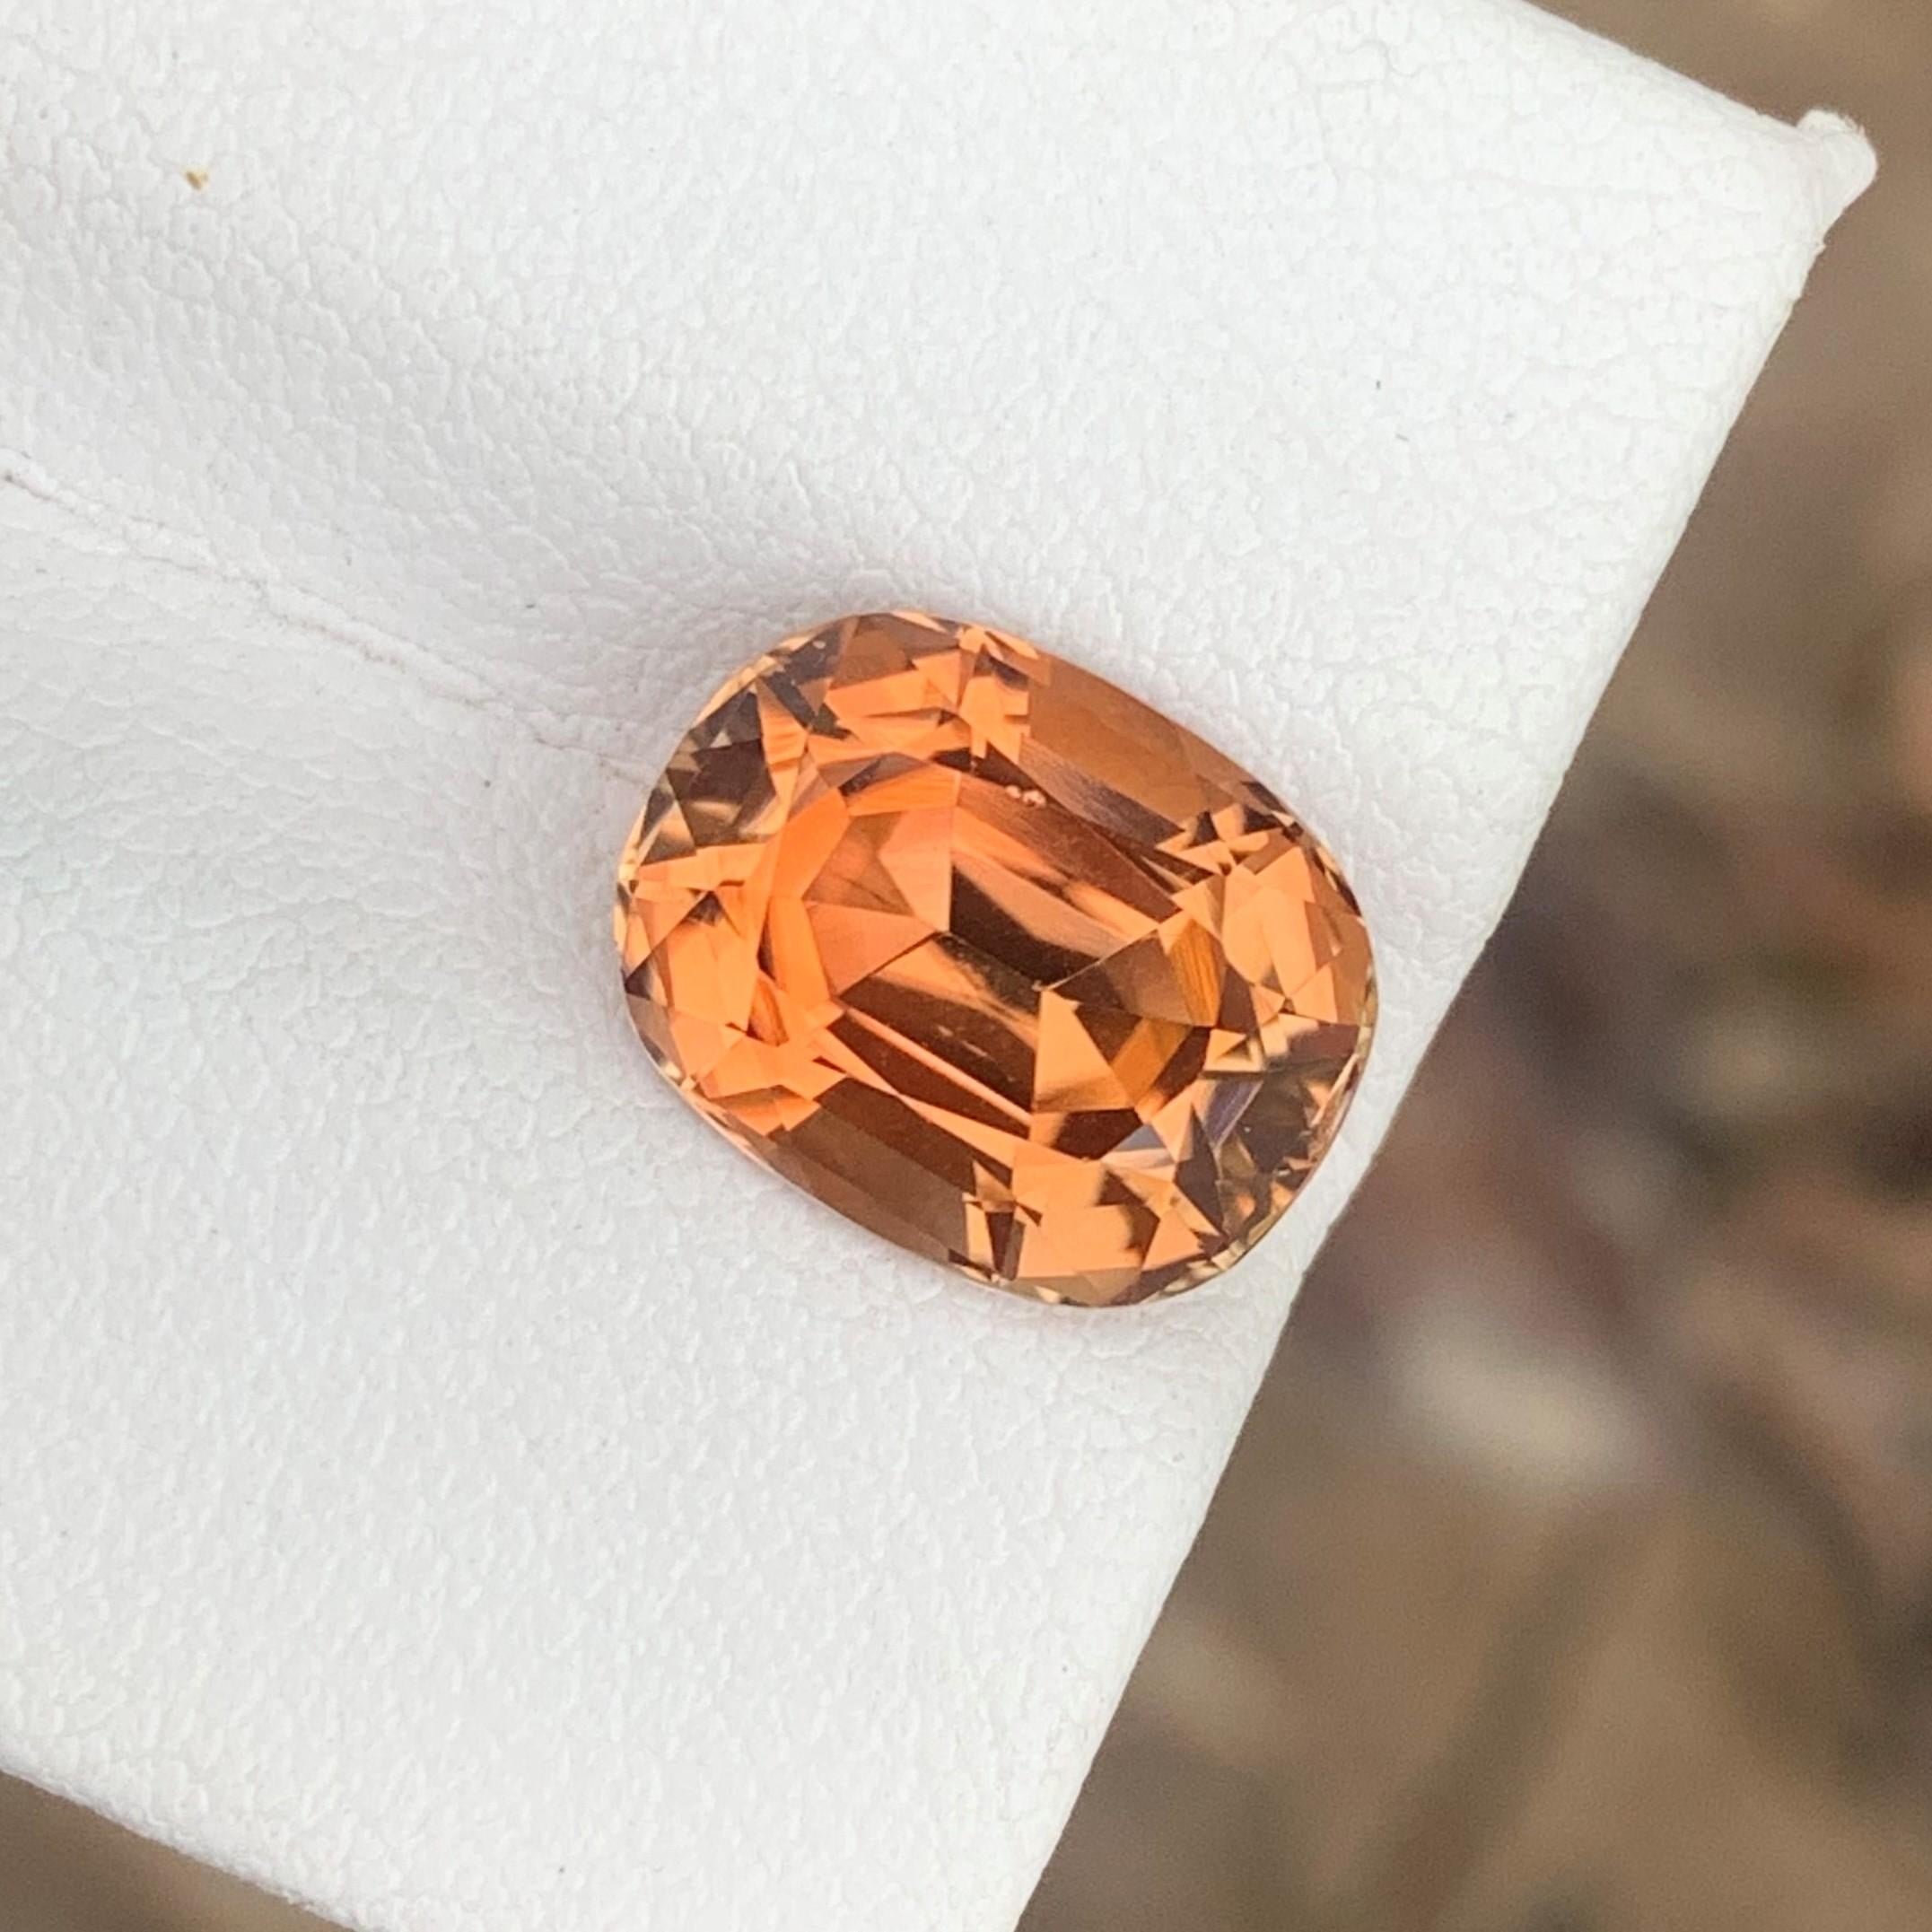 Faceted Tourmaline
Weight: 4.45 Carats
Dimension: 11.3x8.9x6.7 Mm
Origin: Afghanistan
Color: Peach Orange
Shape: Long Cushion
Quality: AAA
Certificate: On Demand
.
Orange tourmaline is a semi-precious gemstone that belongs to the tourmaline family.